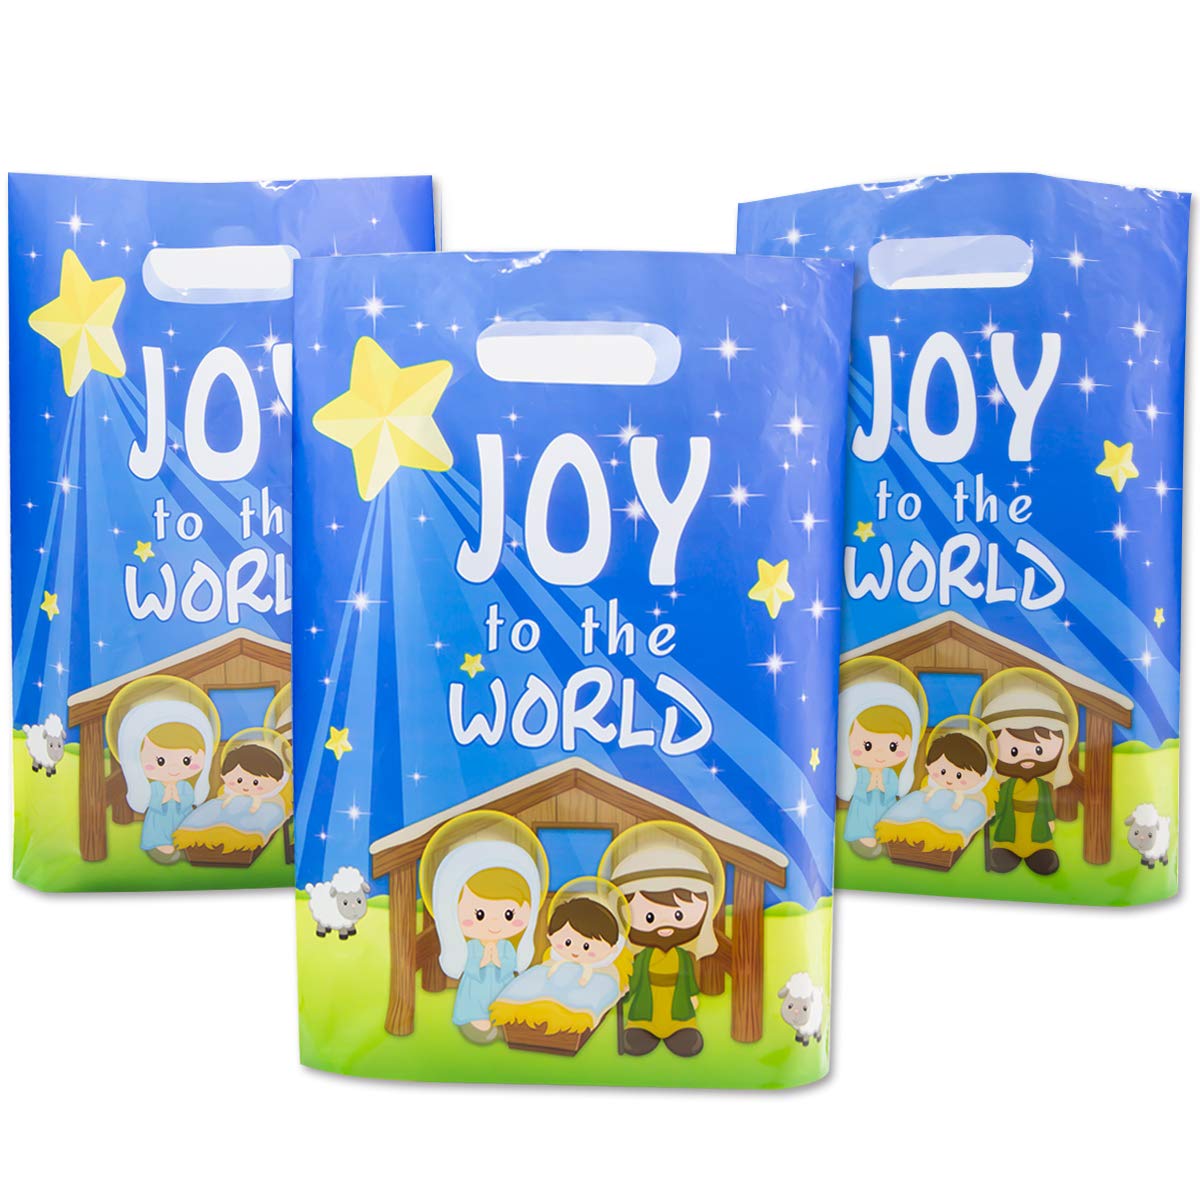 Book Cover Christmas Goodie Bags Treat Goody Bags for Vacation Bible School Xmas Nativity Party Supply 25Pcs